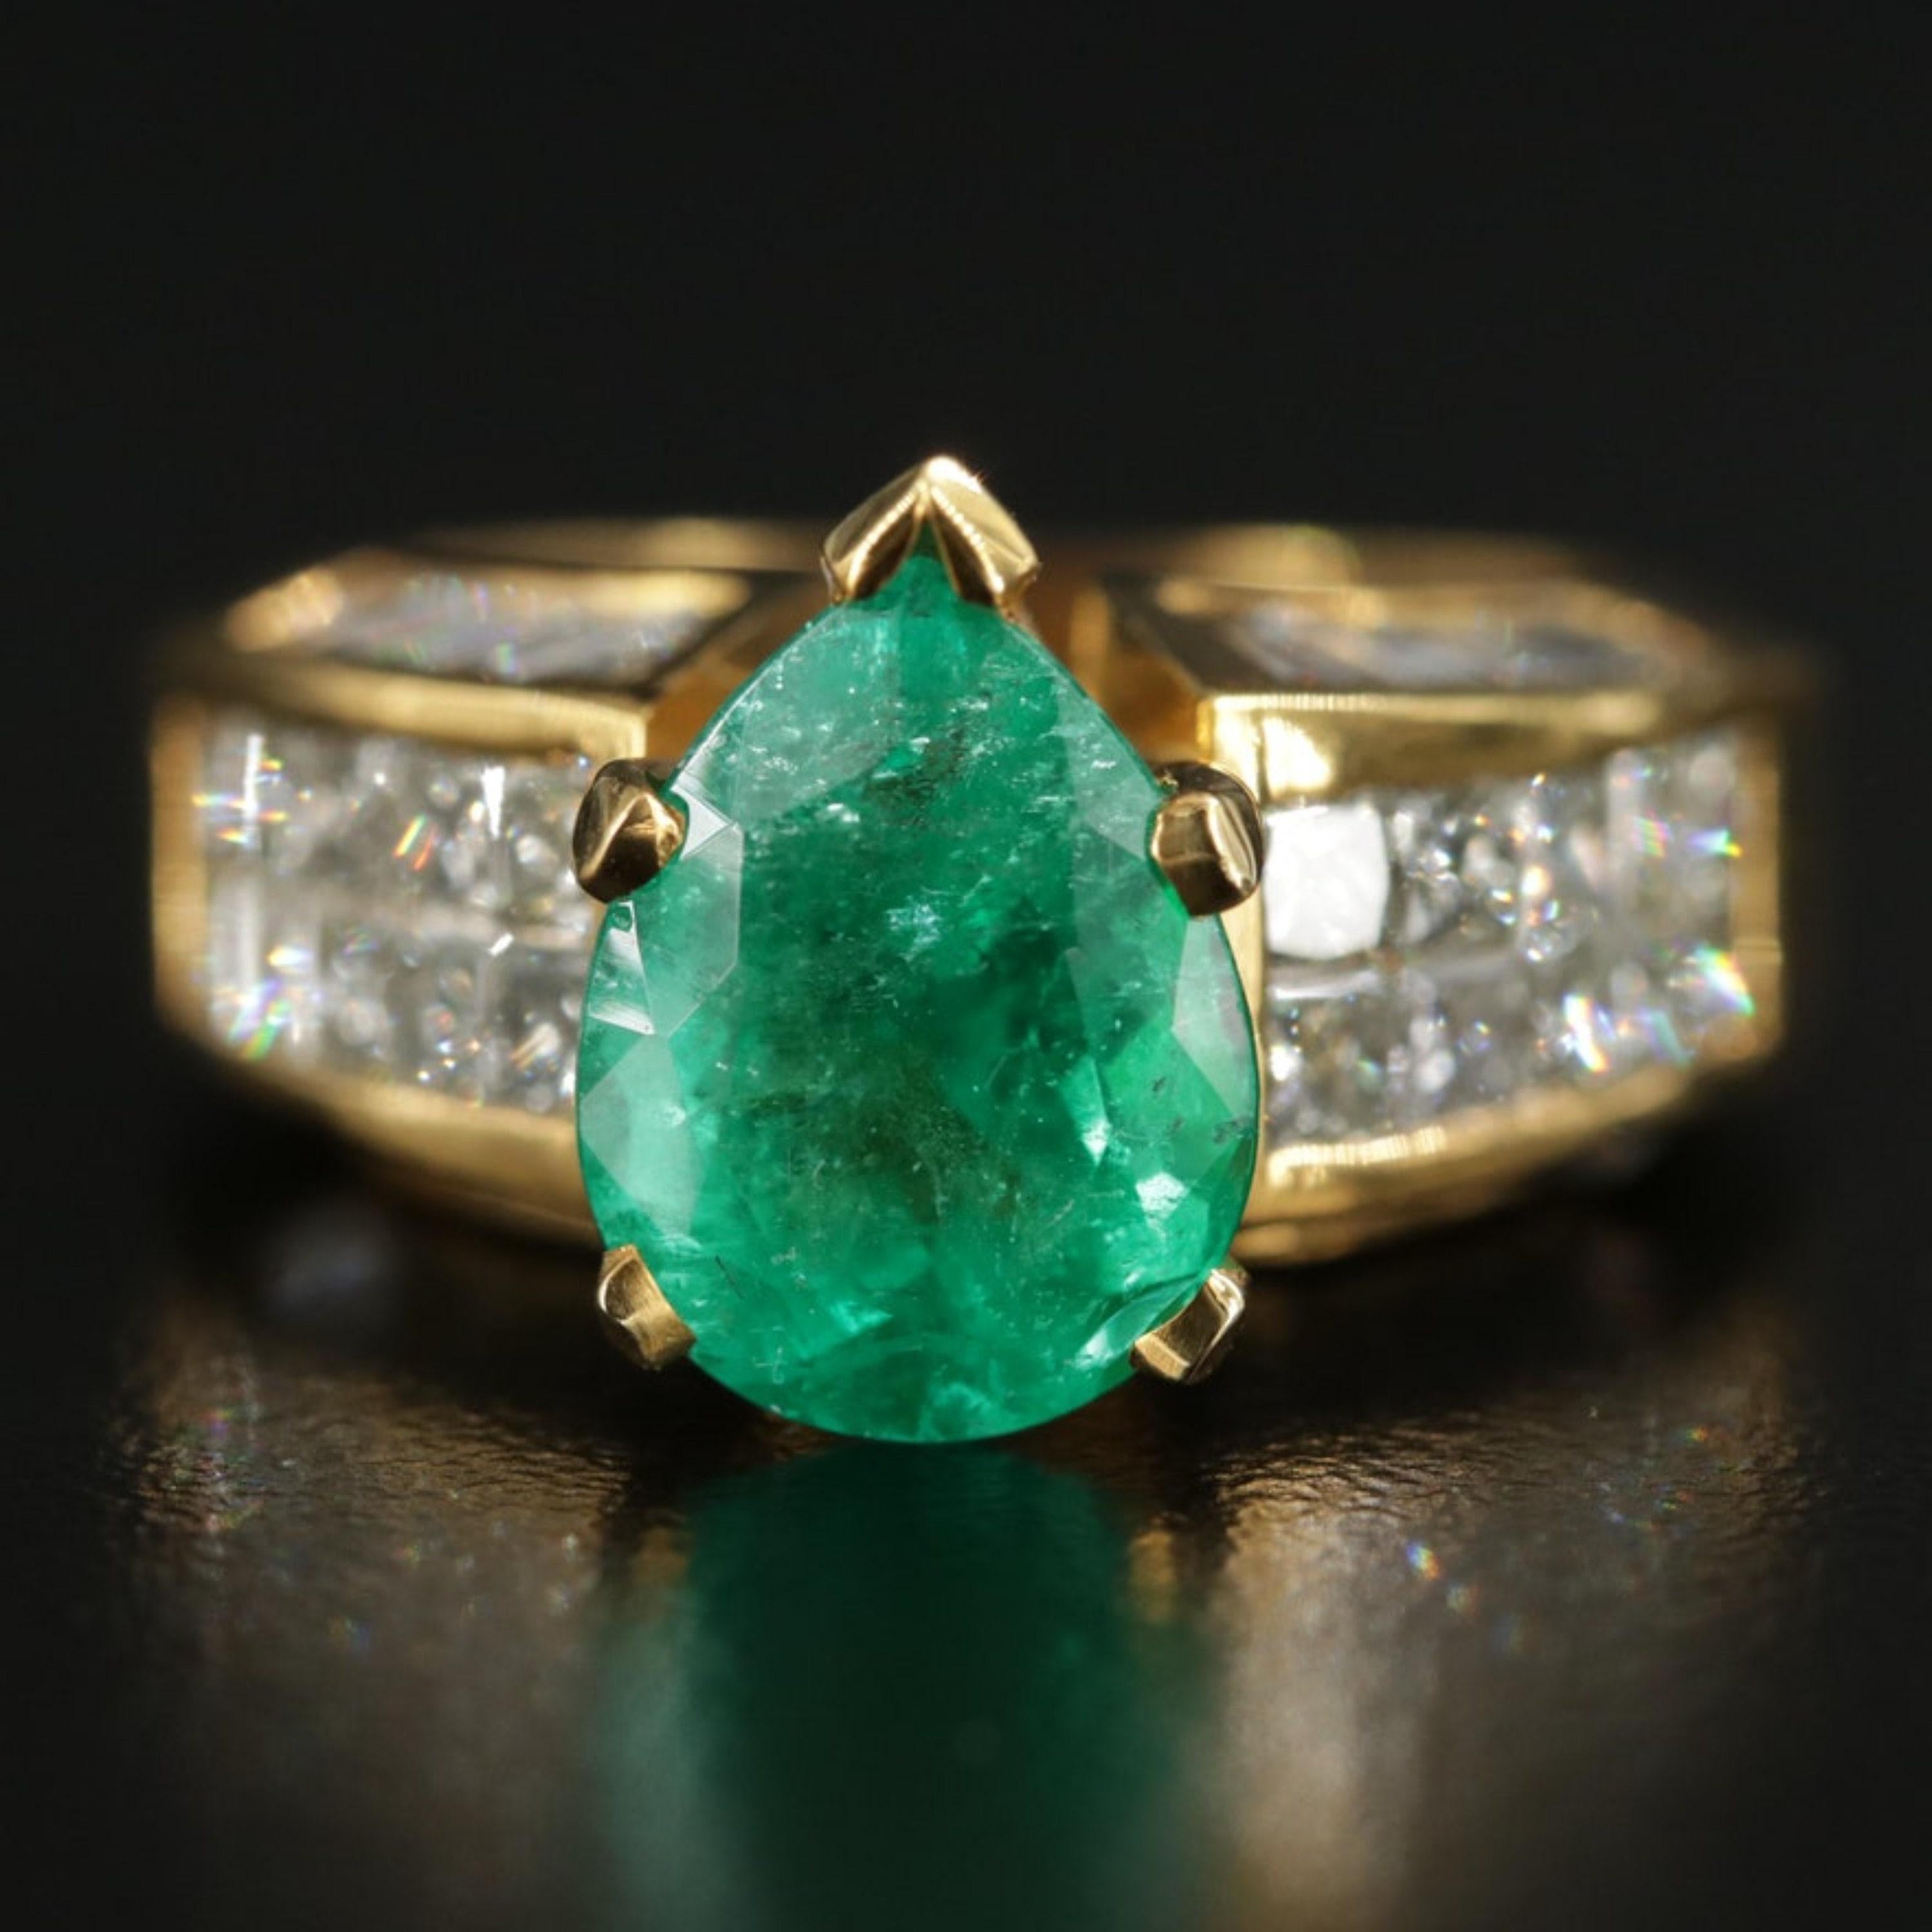 For Sale:  3.32 Carat Pear Cut Emerald Diamond Engagement Wedding Ring Yellow Gold Ring 5